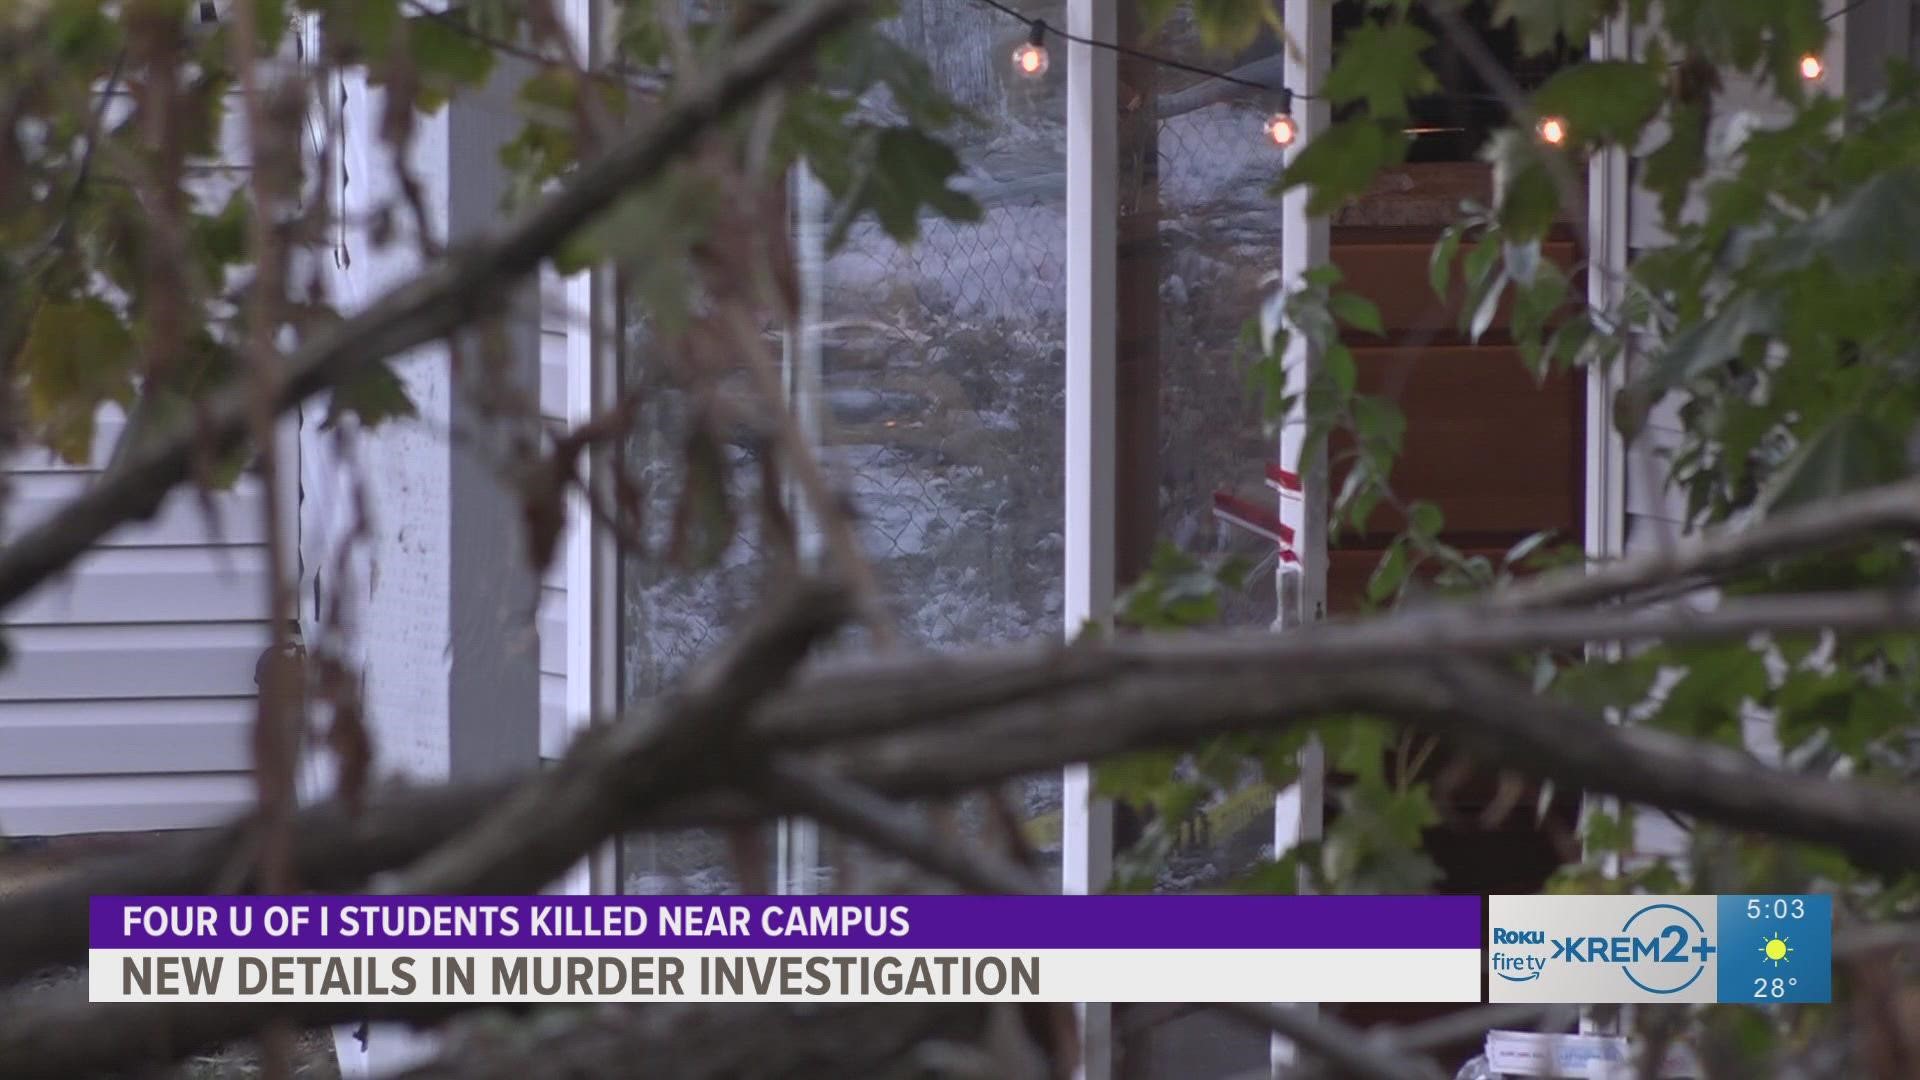 KREM 2's Amanda Roley gives an update on the crime scene where four University of Idaho students were murdered.